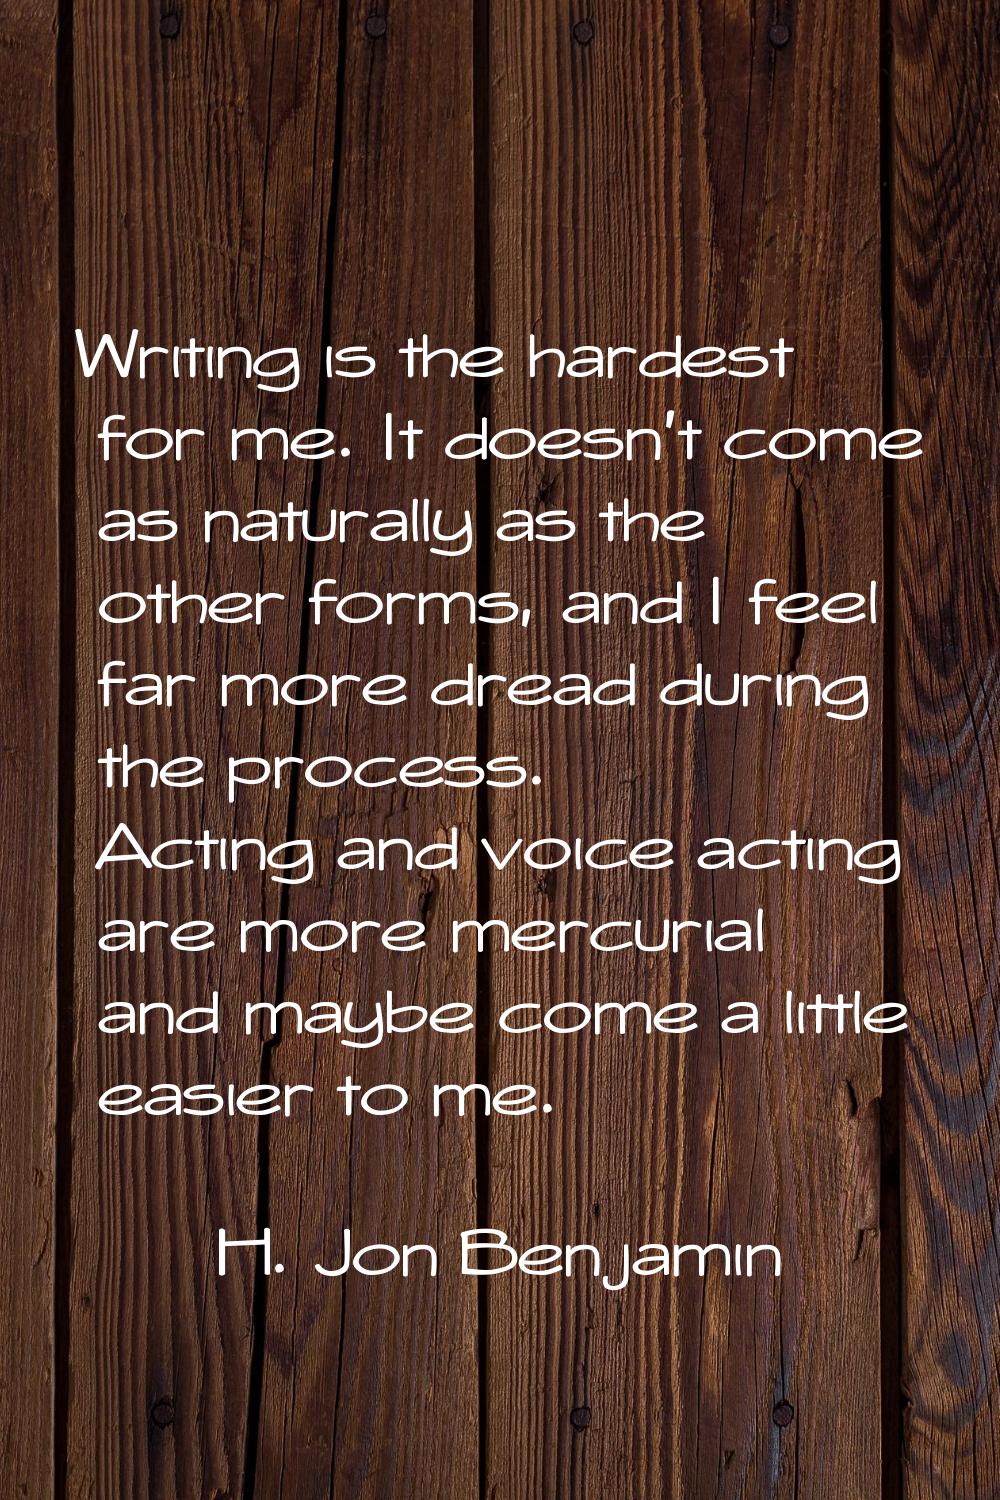 Writing is the hardest for me. It doesn't come as naturally as the other forms, and I feel far more